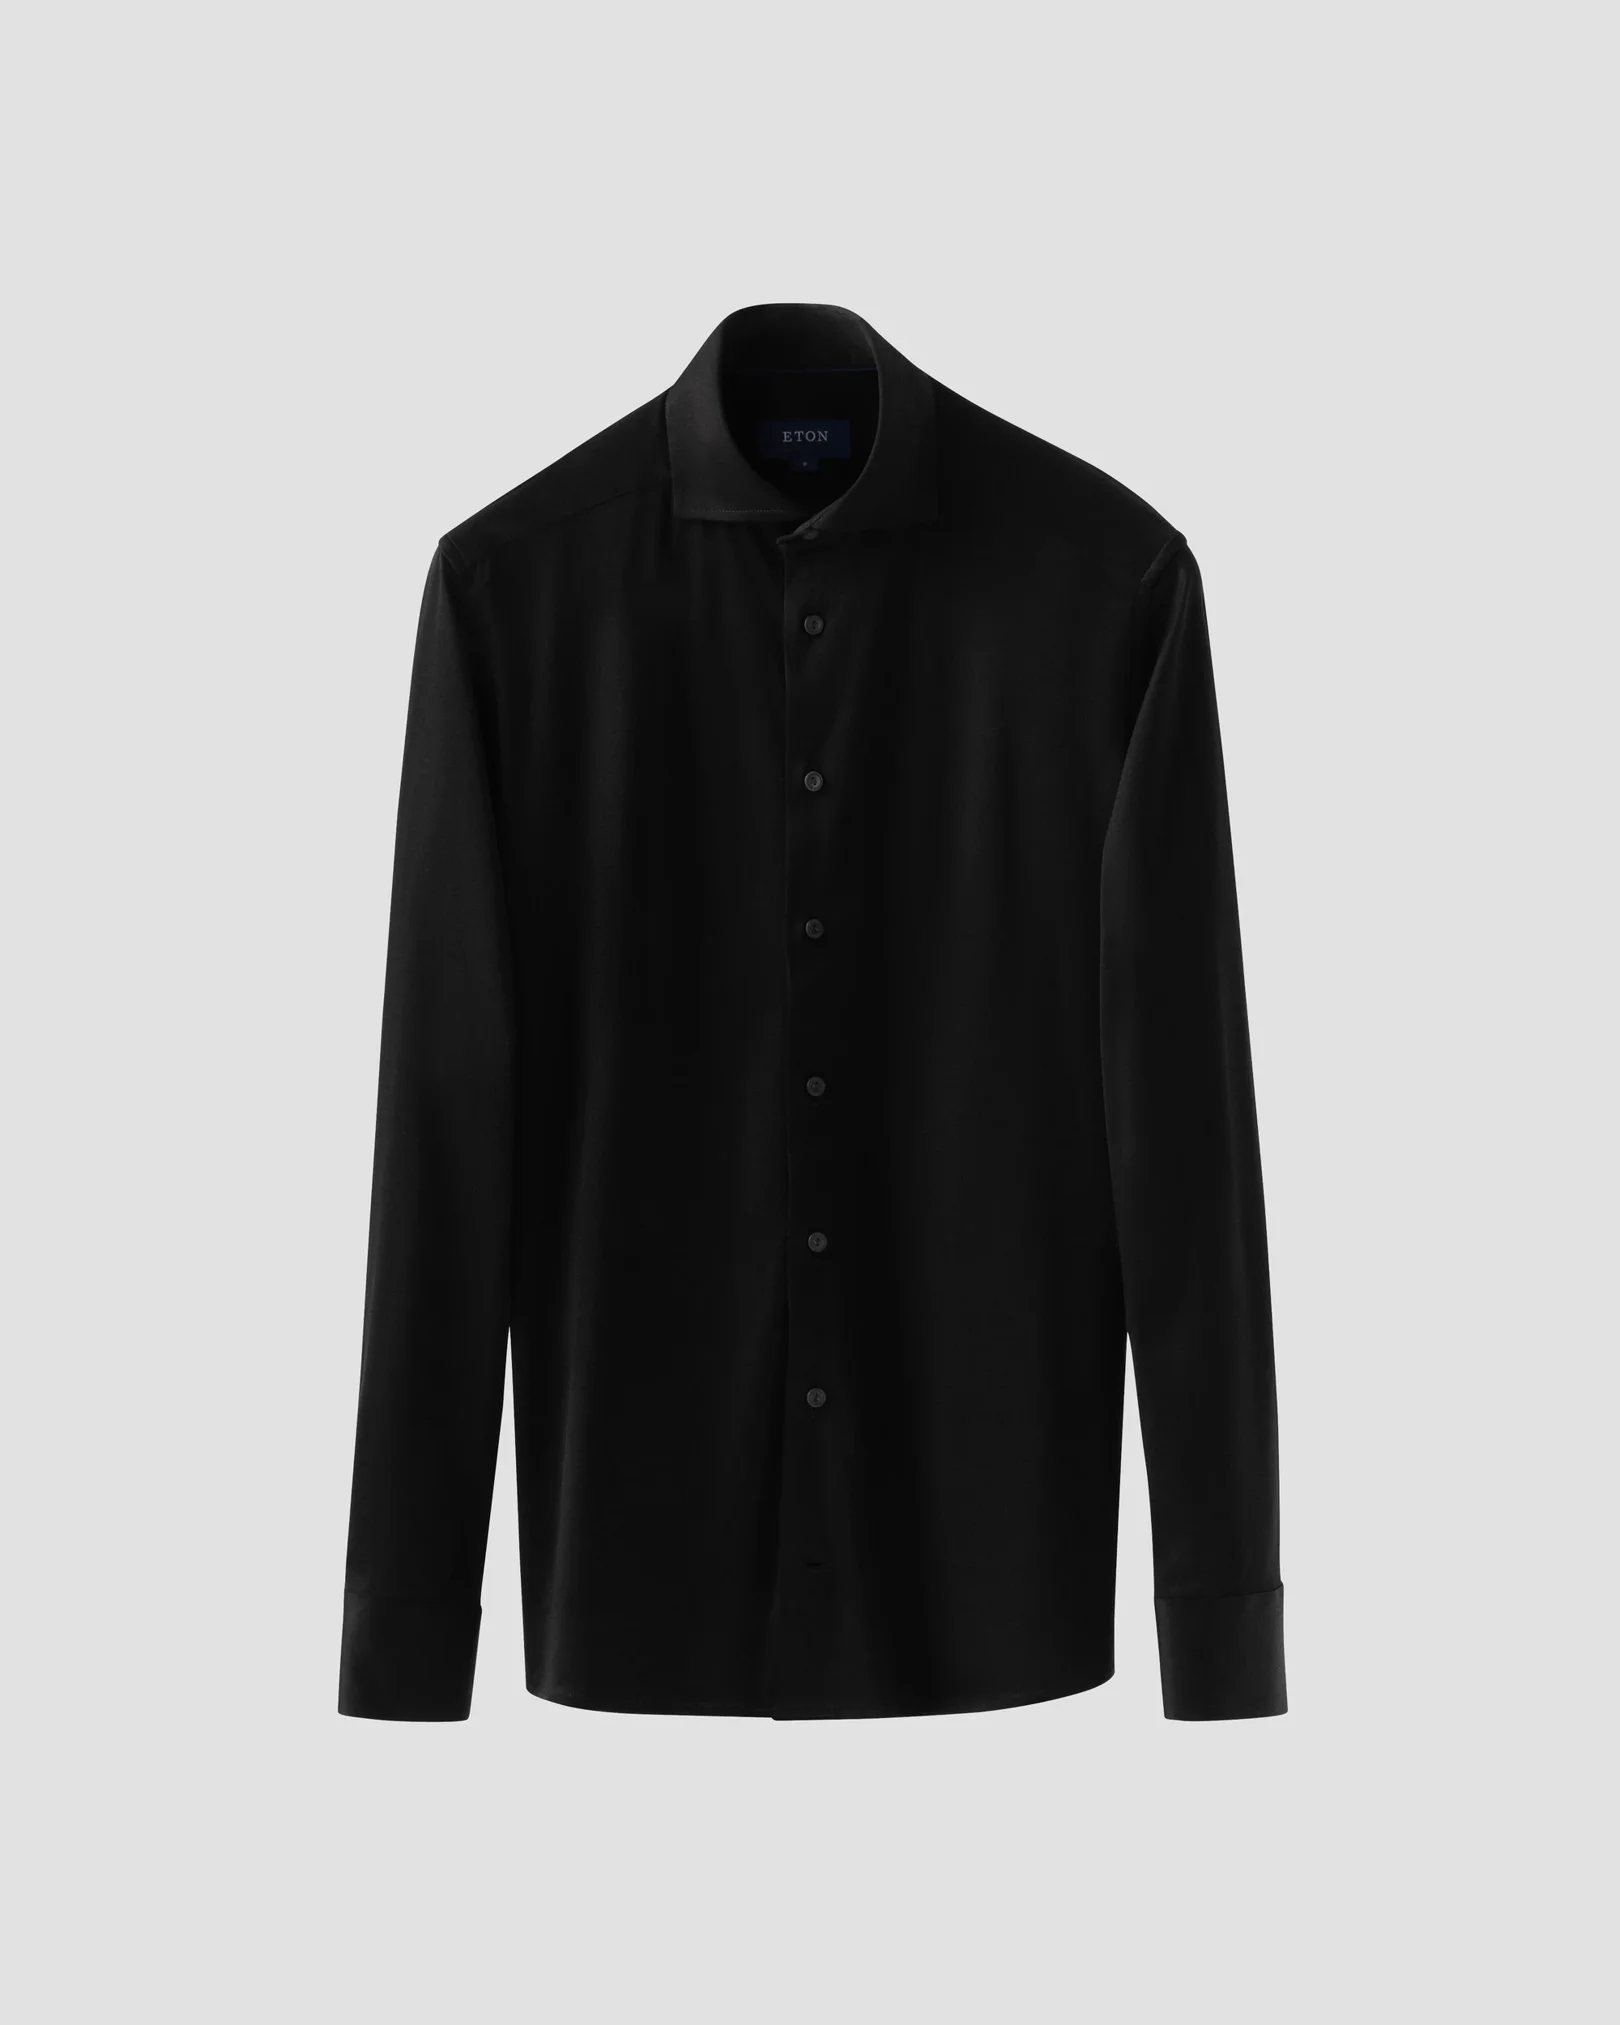 Eton - black solid colored jersey